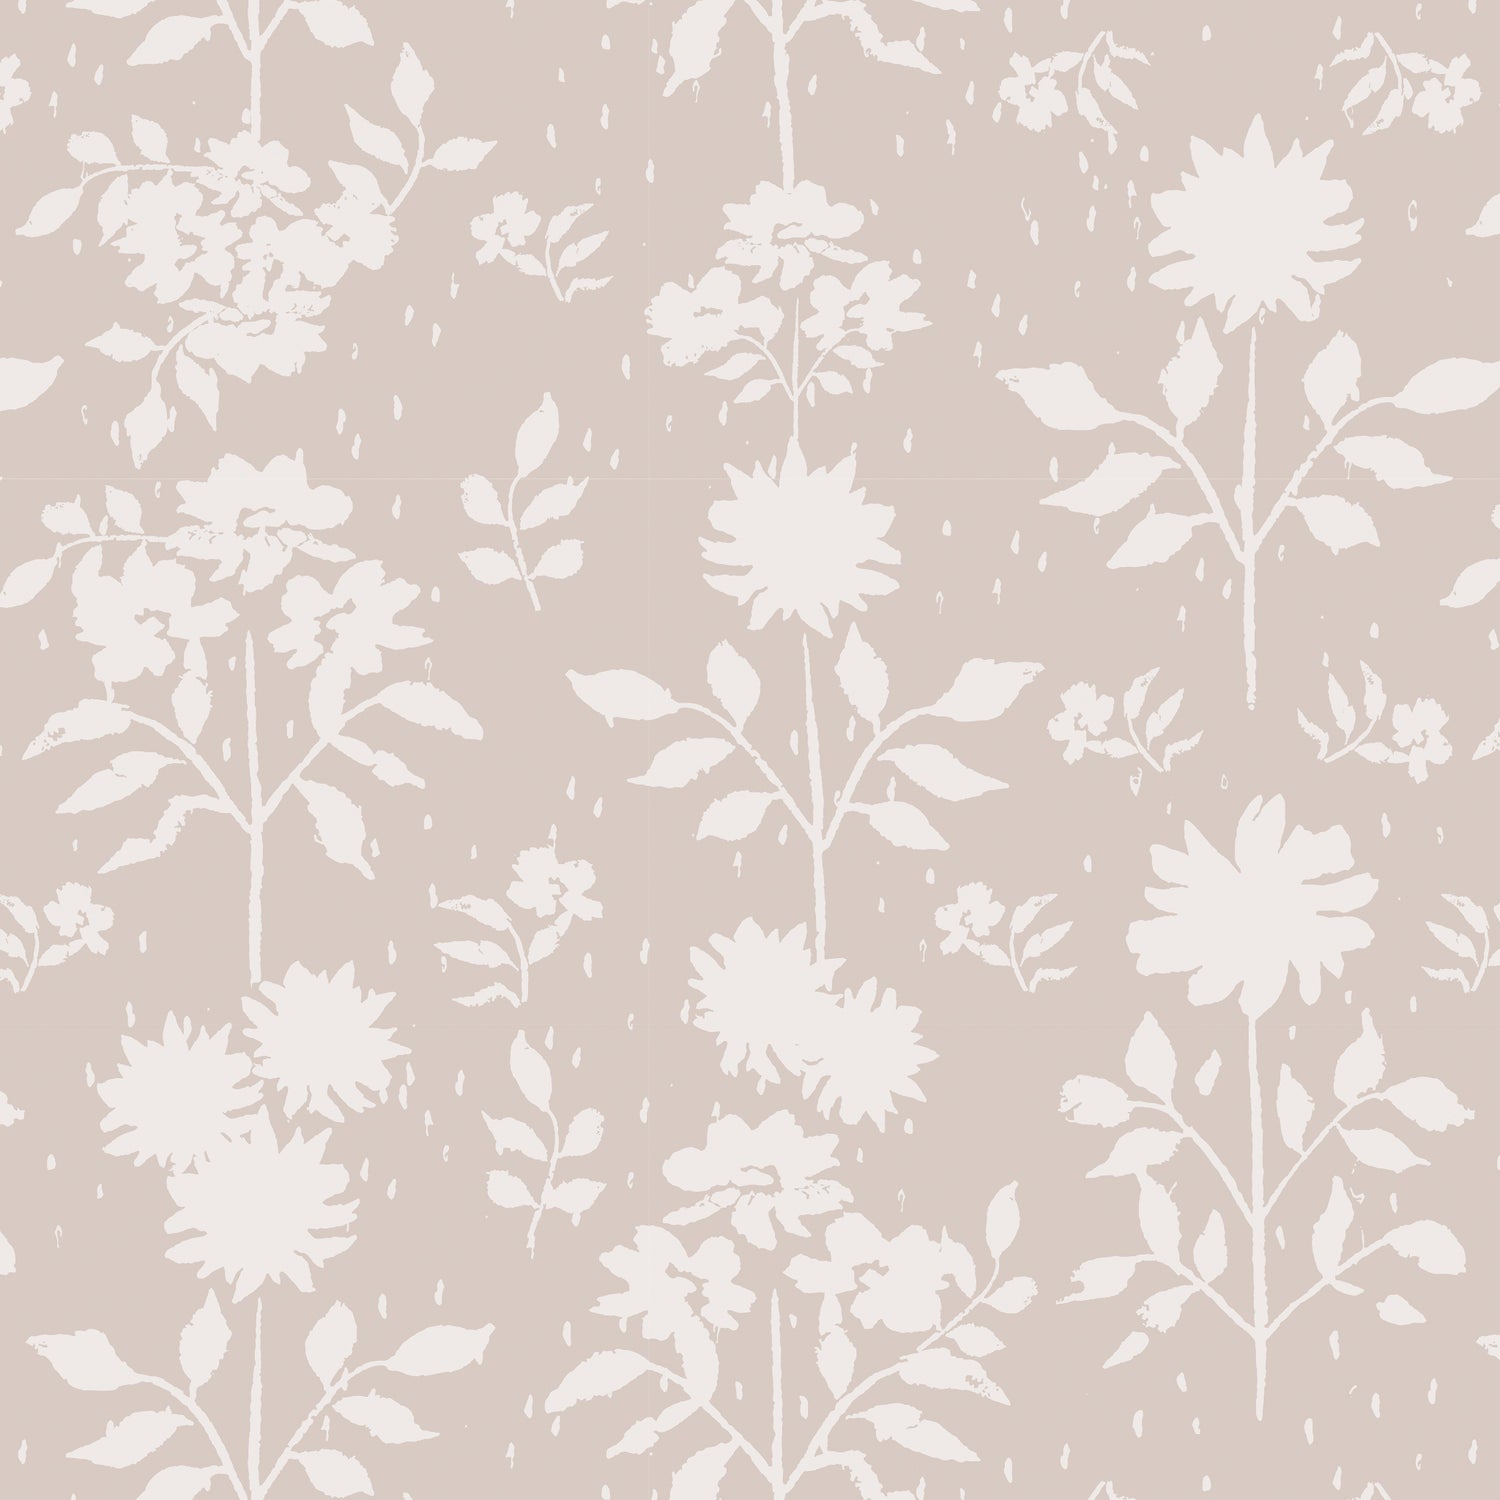 Close up view of delicate white florals on nude colored background on designer quality wallpaper